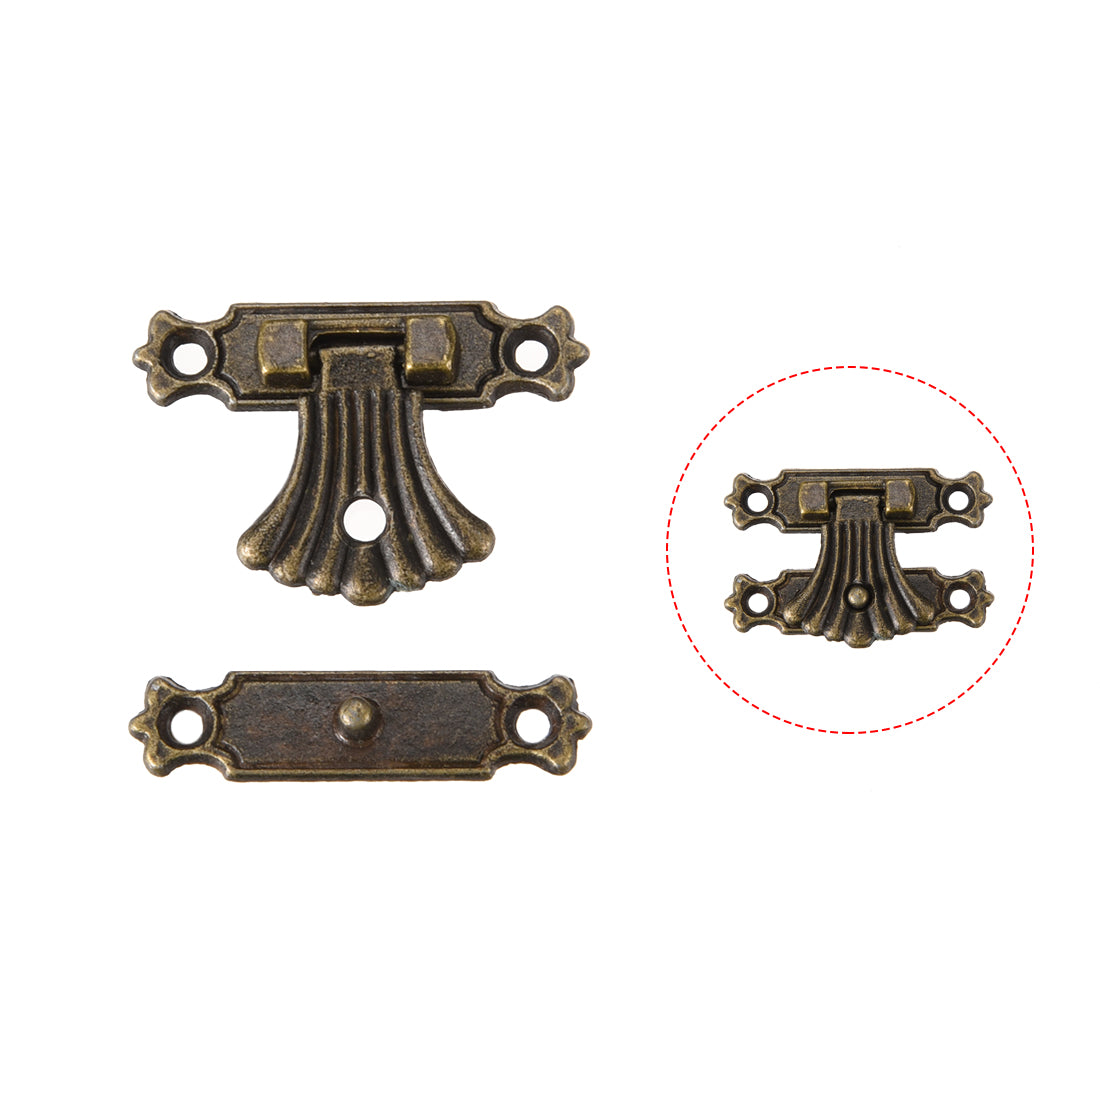 uxcell Uxcell 5 Sets Wood Case Chest Box Rectangle Clasp Closure Hasp Latches Bronze Tone 37 x 27mm